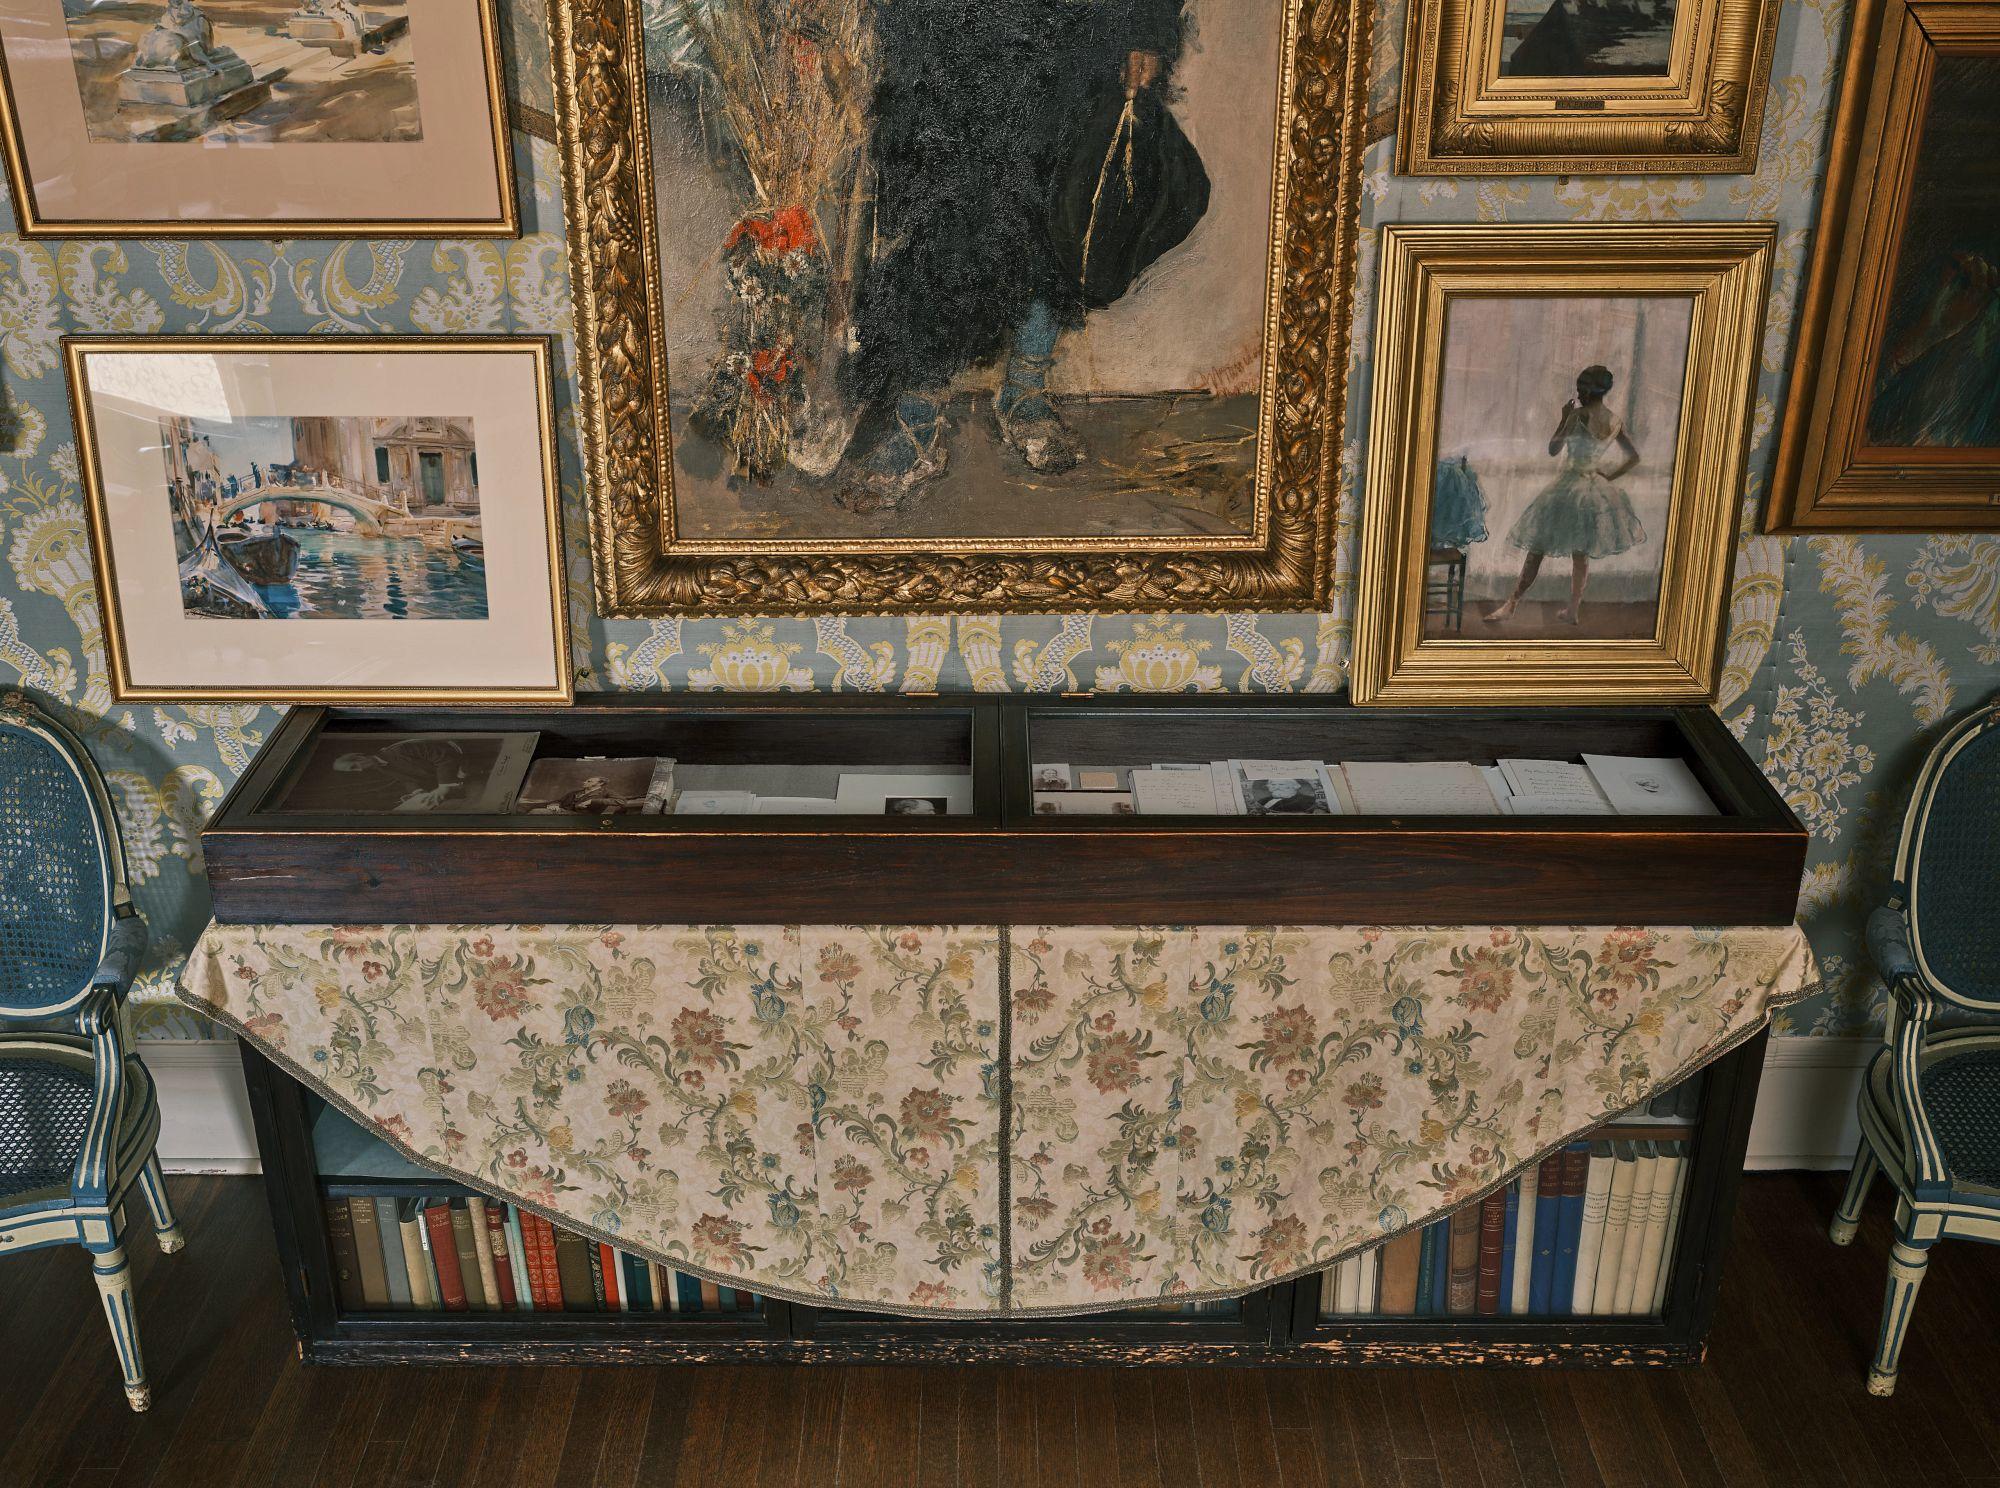 A glass covered case with photographs, papers, and books in a room with paintings on the wall.